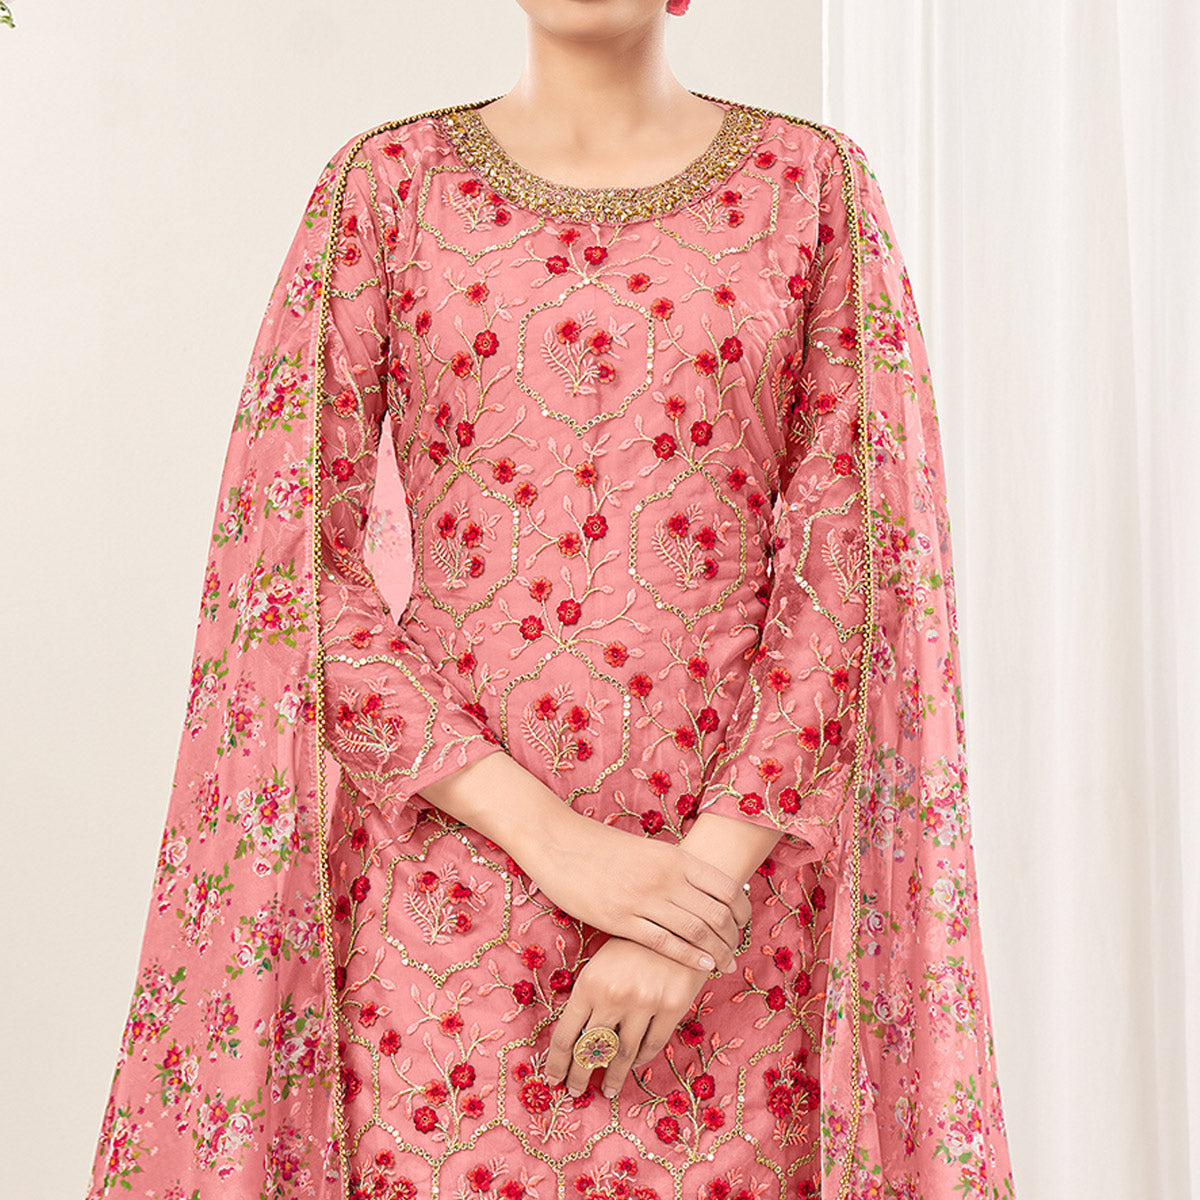 Pink Floral Sequins Embroidered Net Patiala Suit